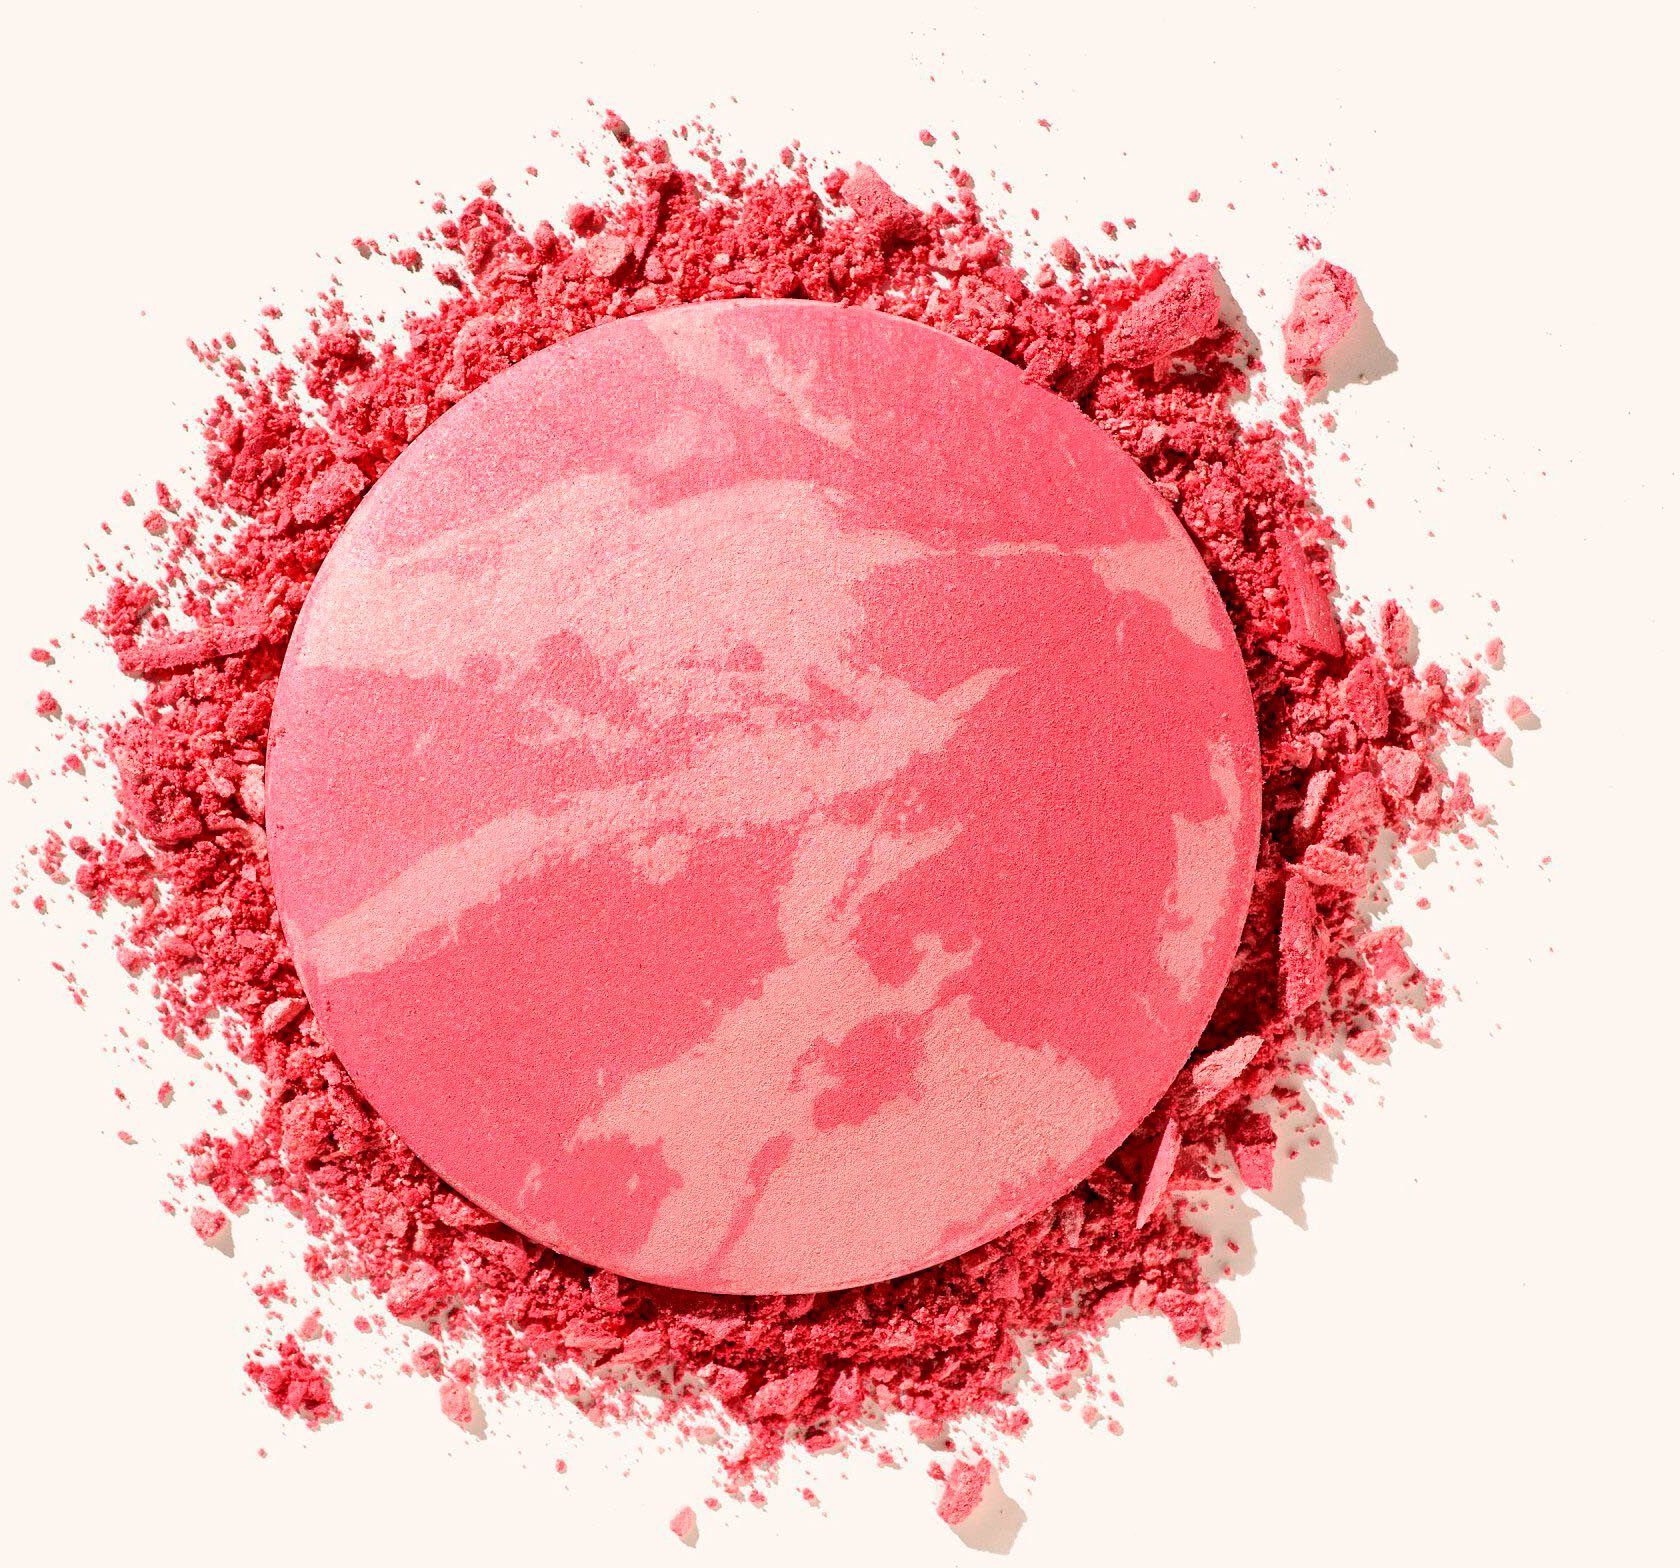 Catrice Rouge Blush, Lover Marbled Cheek 3-tlg